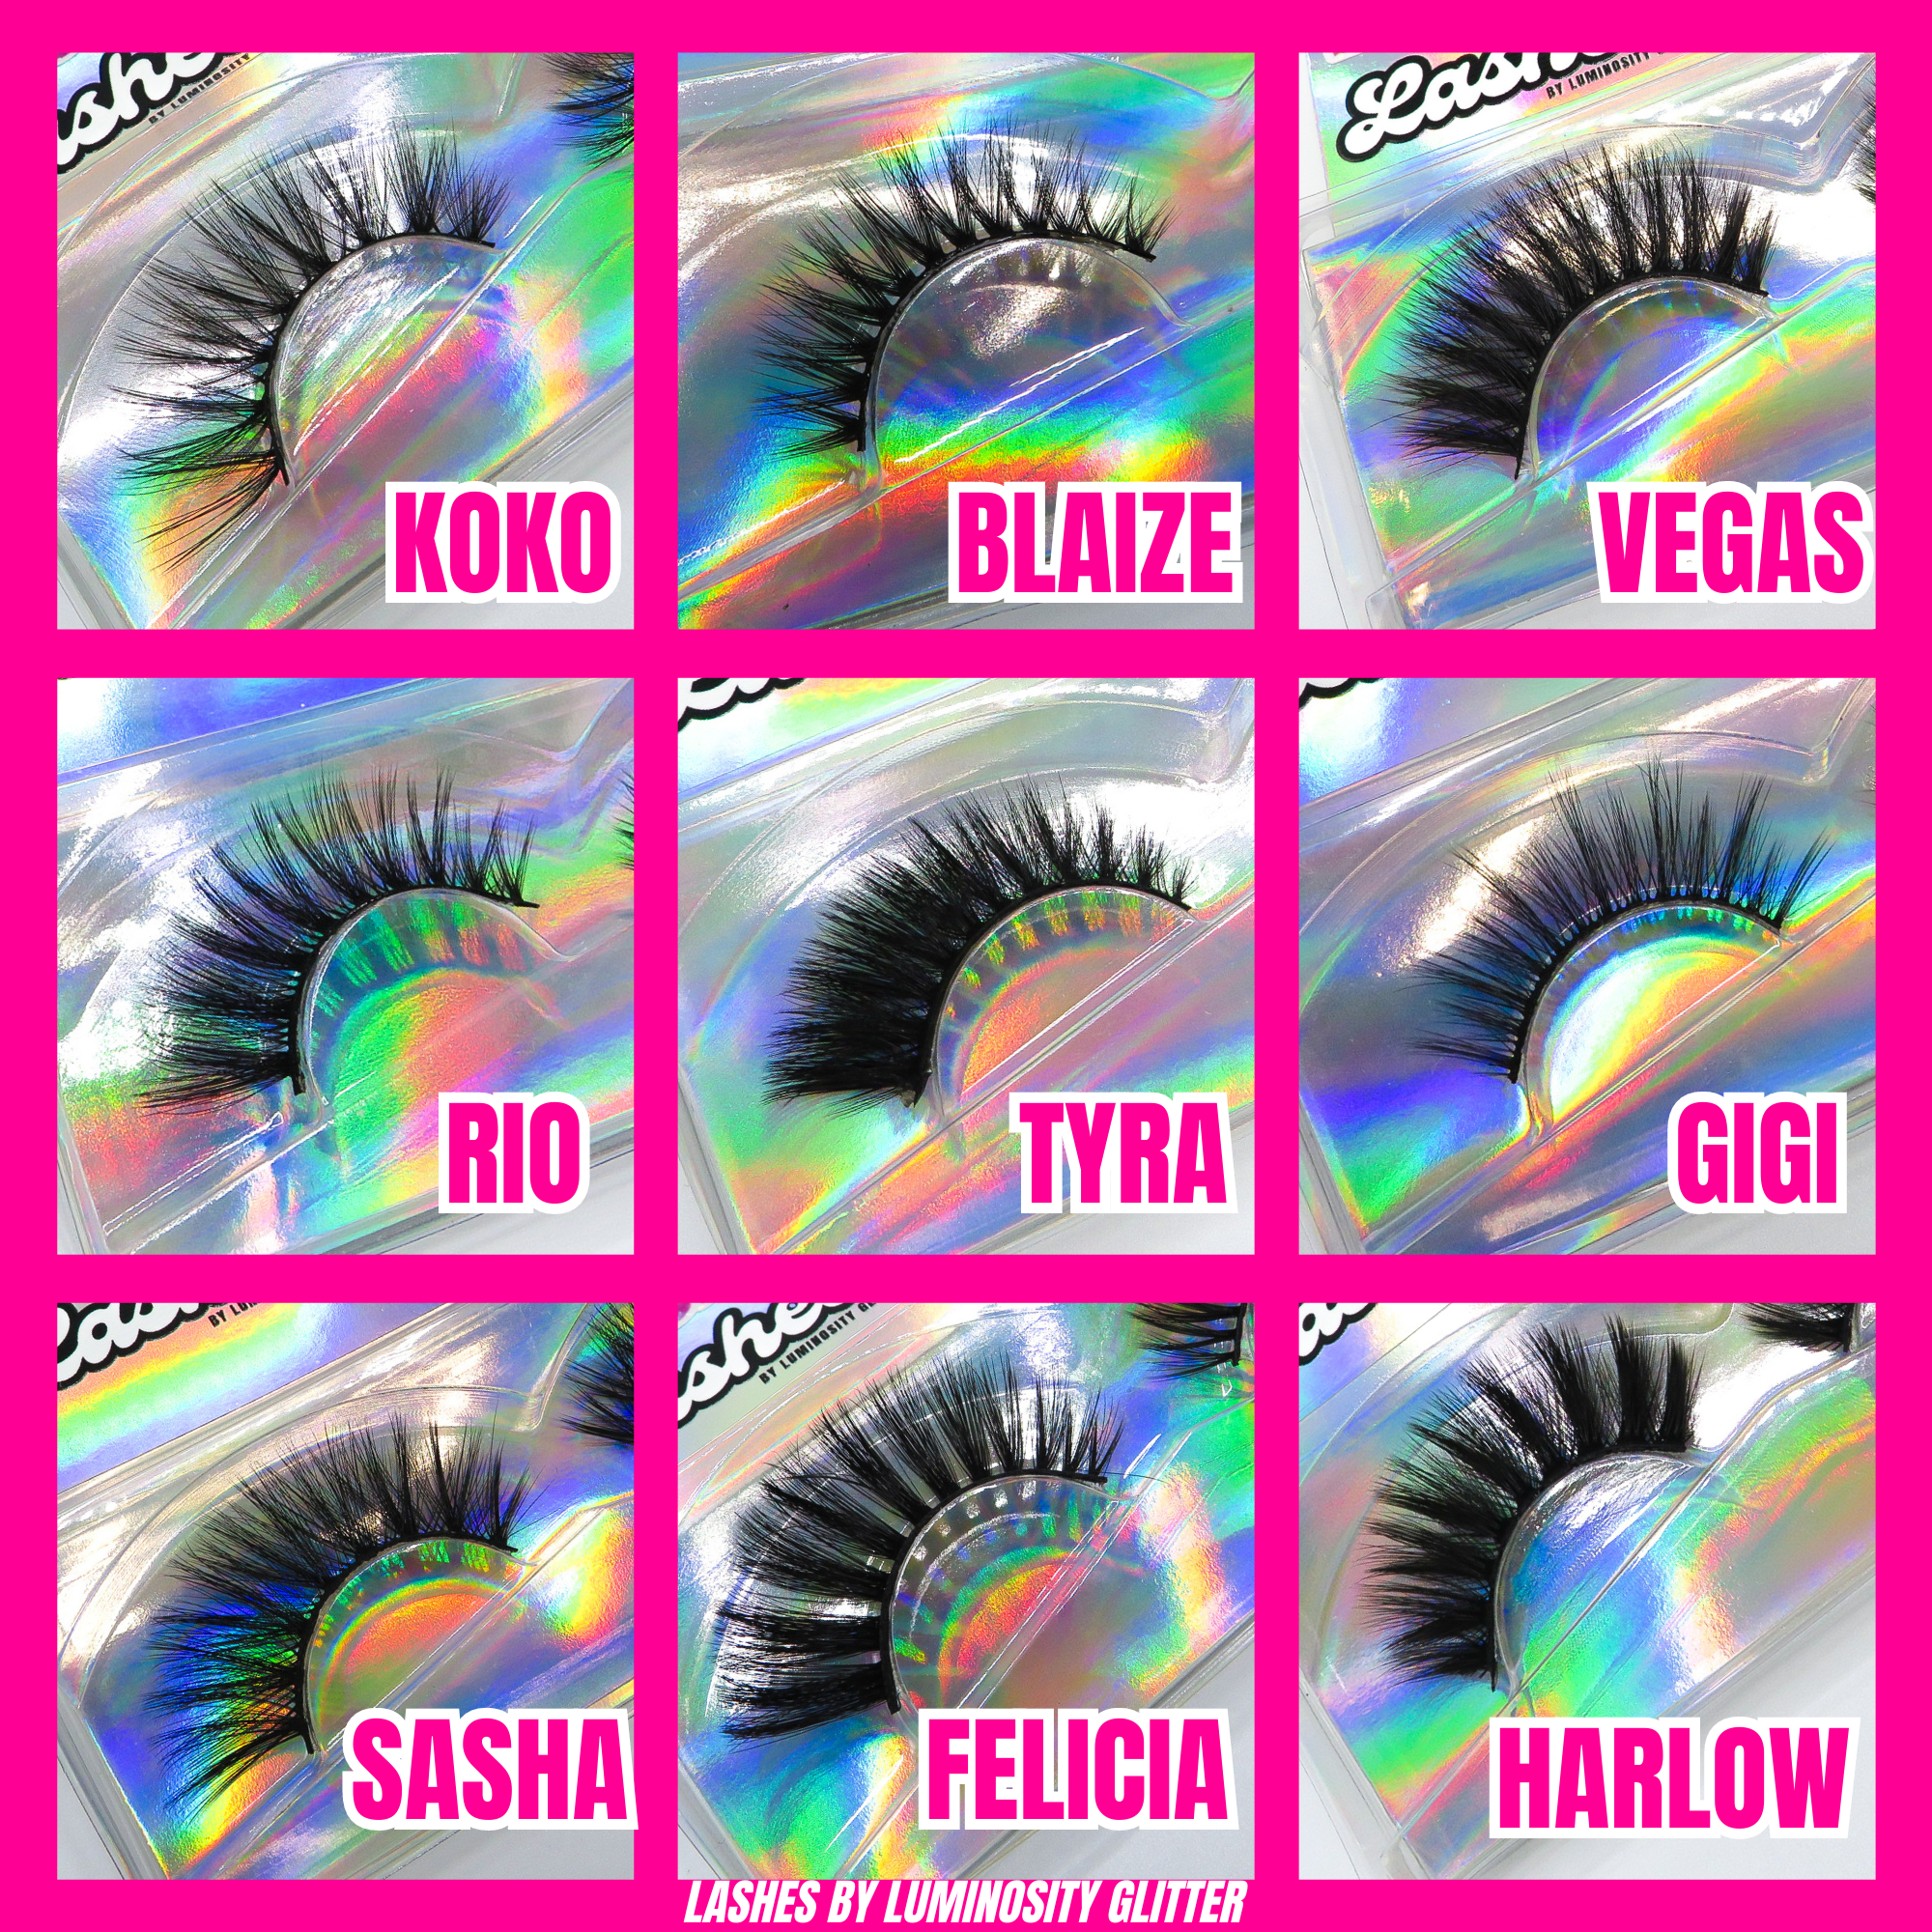 Lashes by Luminosity Glitter, available in a range of sizes and styles.